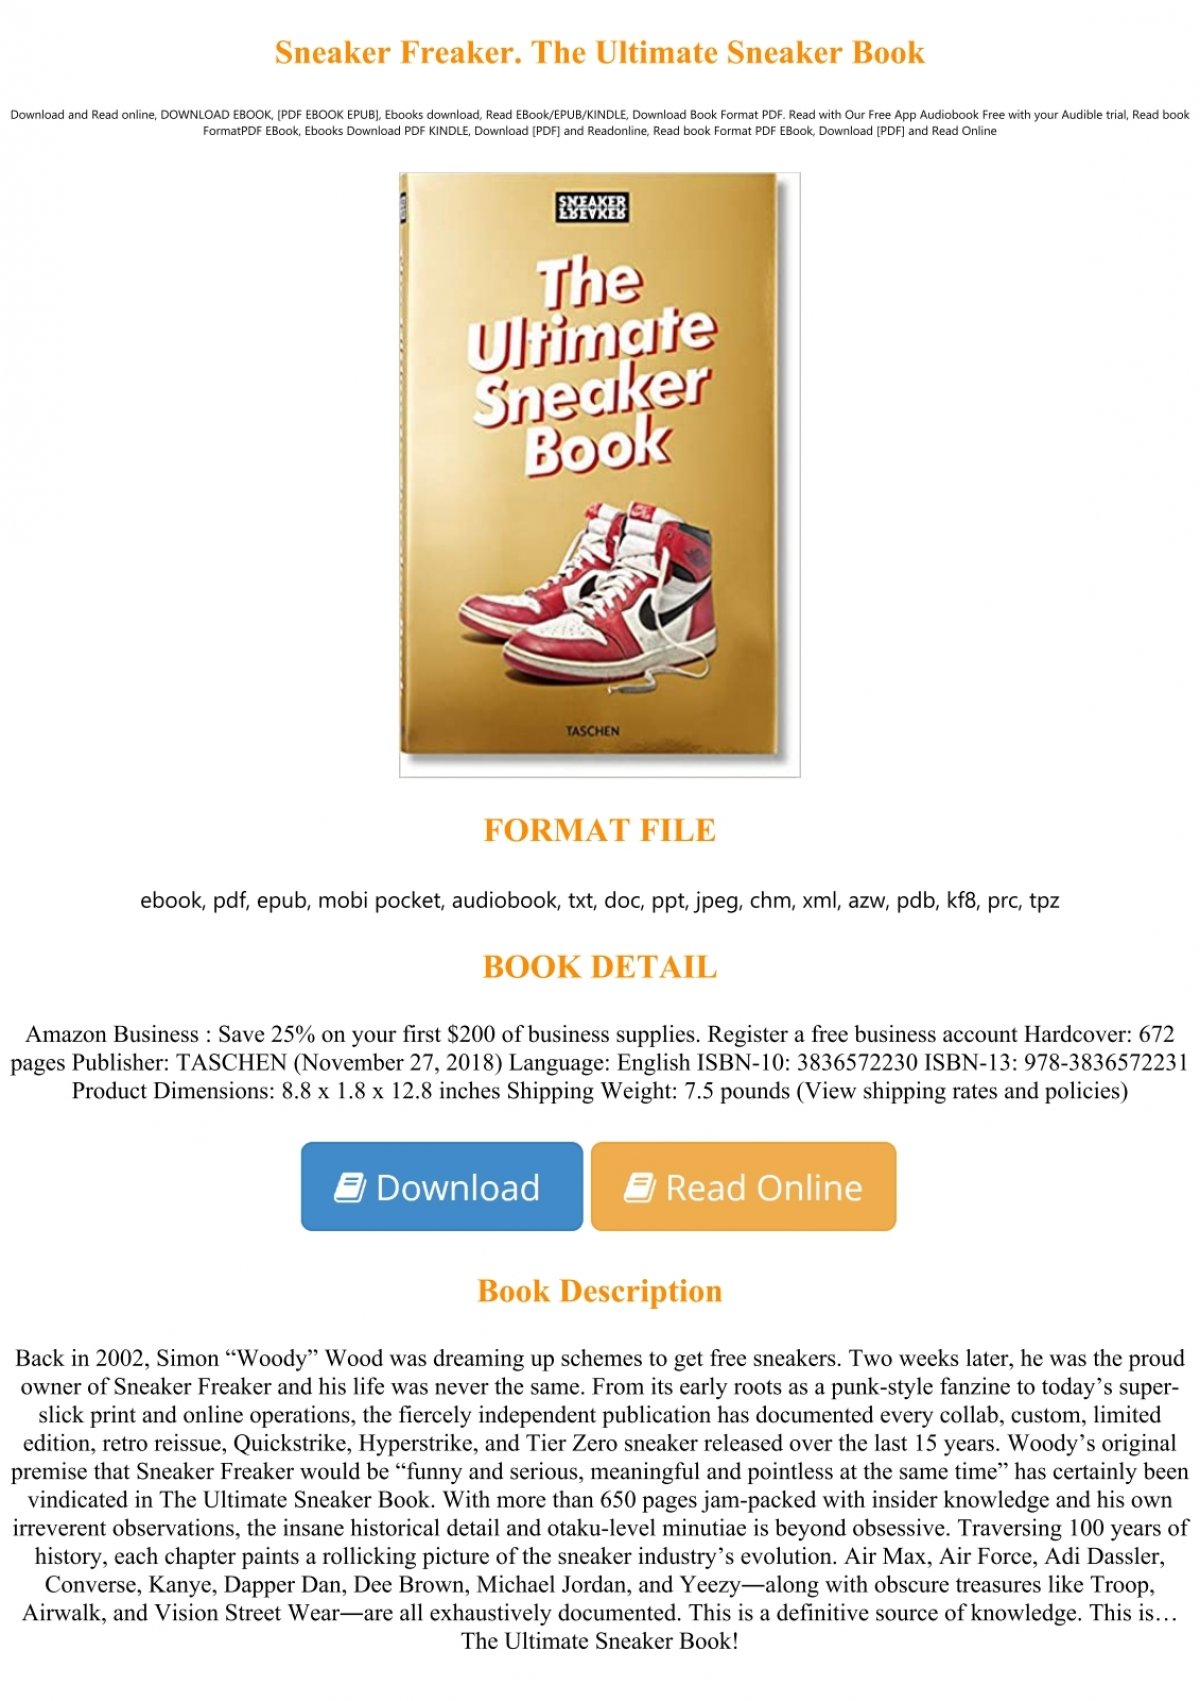 Pdf Download Sneaker Freaker The Ultimate Sneaker Book For Any Device